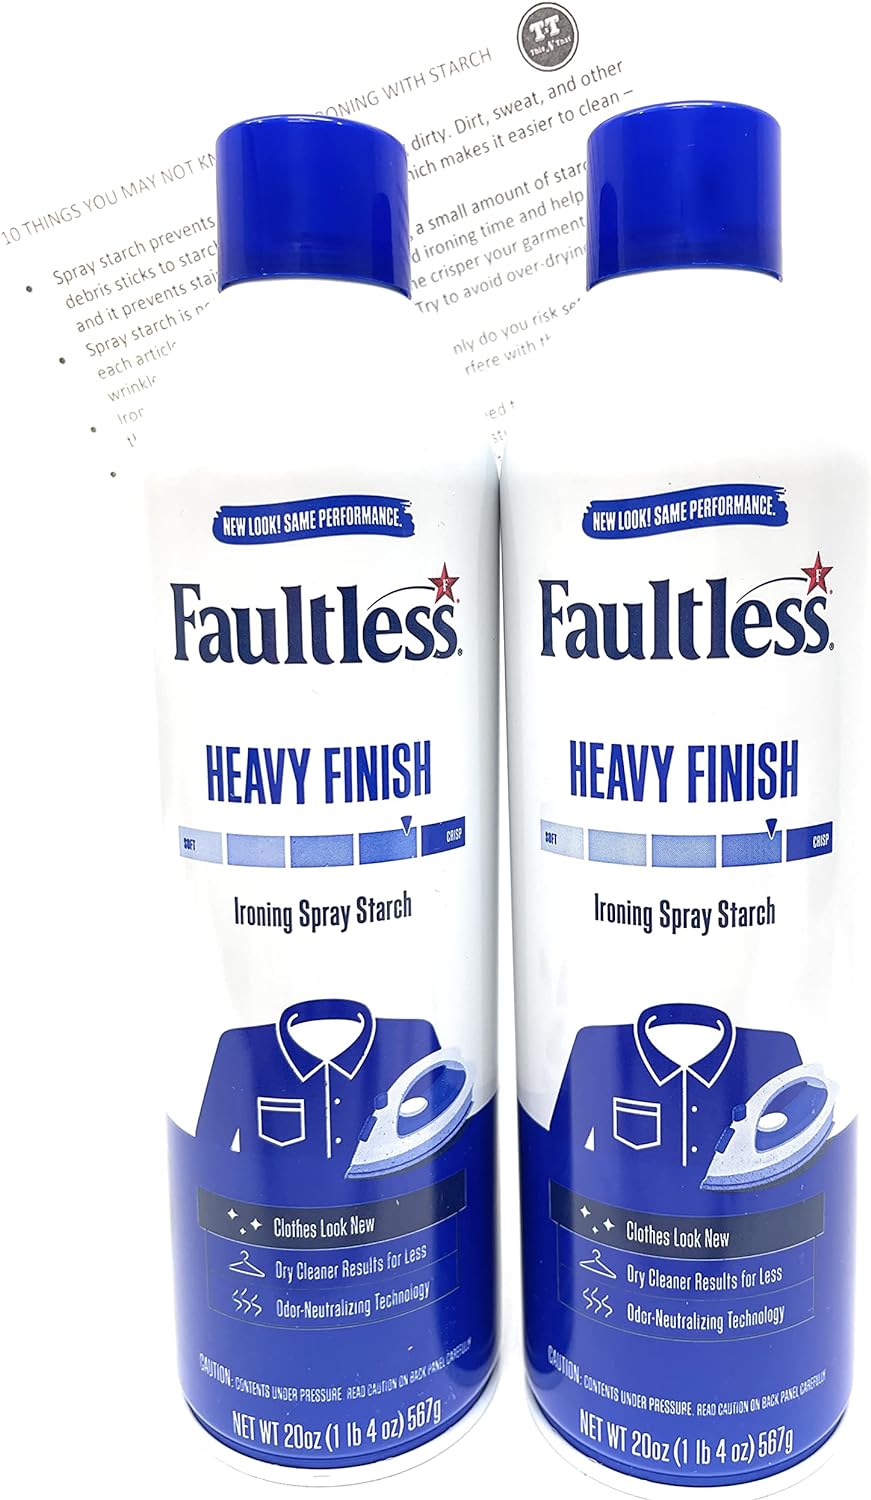 Faultless Heavy Finish Ironing Spray Starch Bundle: (2) 20oz Cans and ThisNThat Tip Card